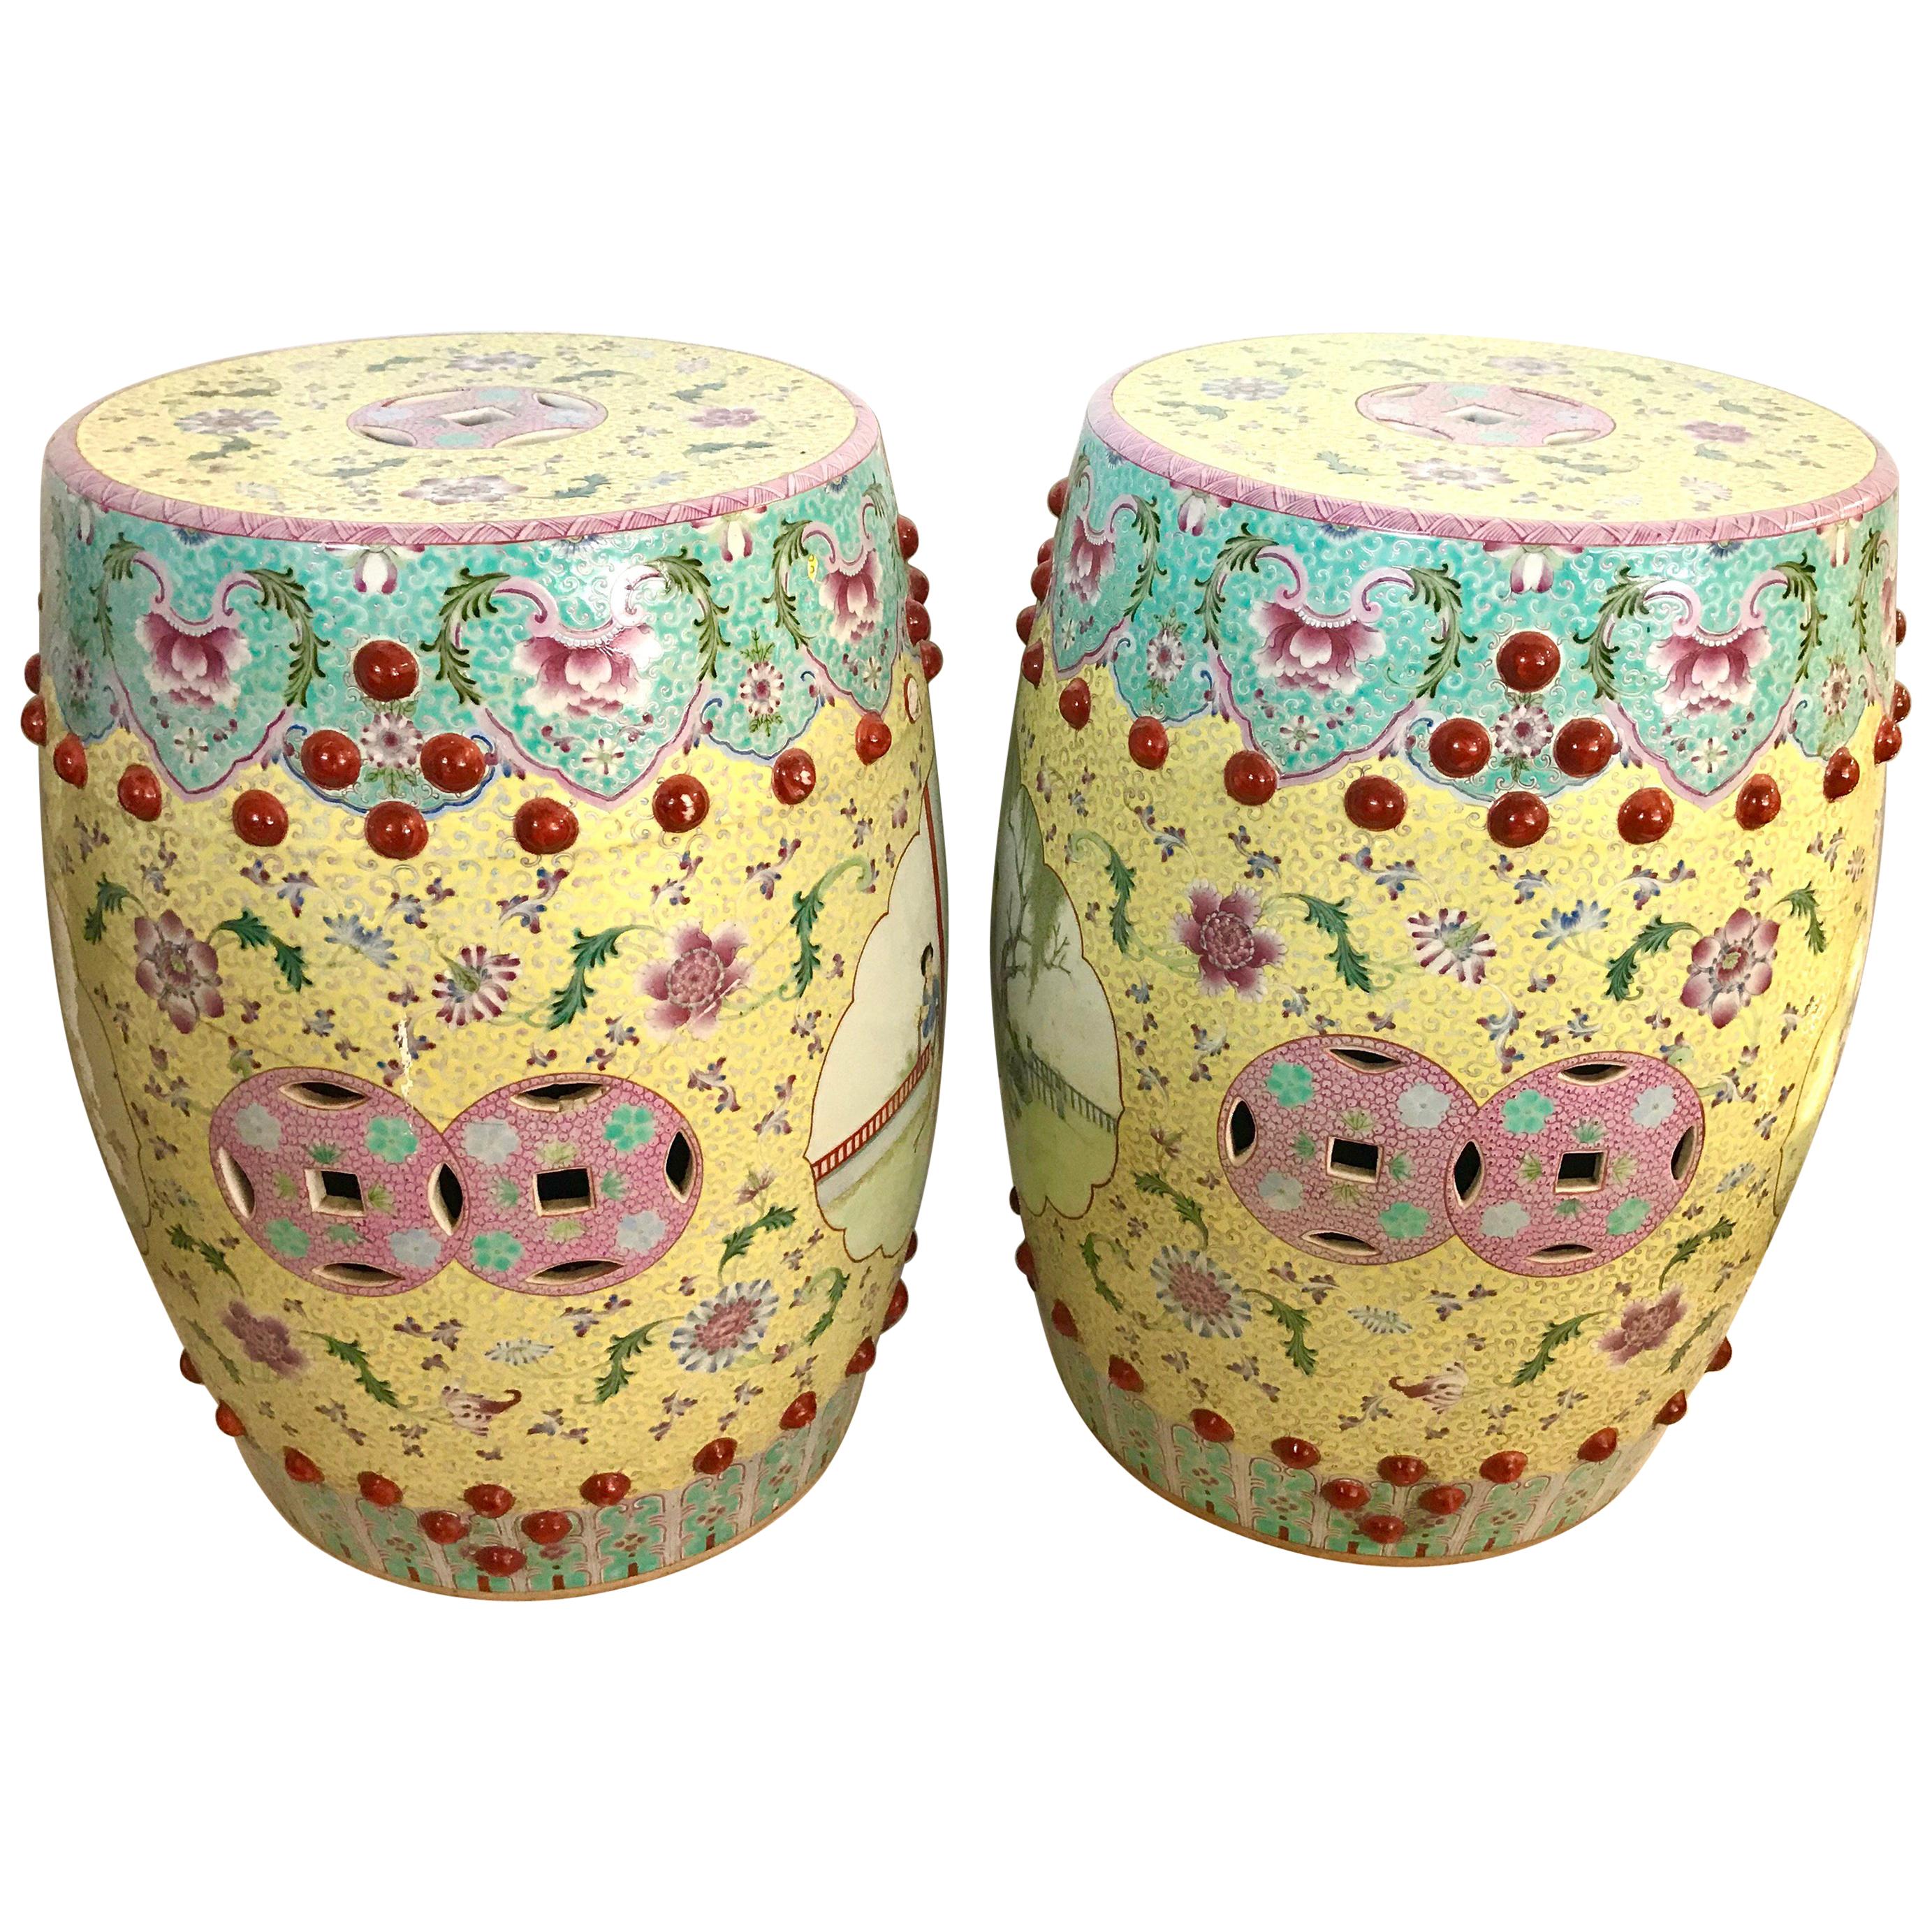 Pair of Chinese Famille Rose Porcelain Garden Stools Seats